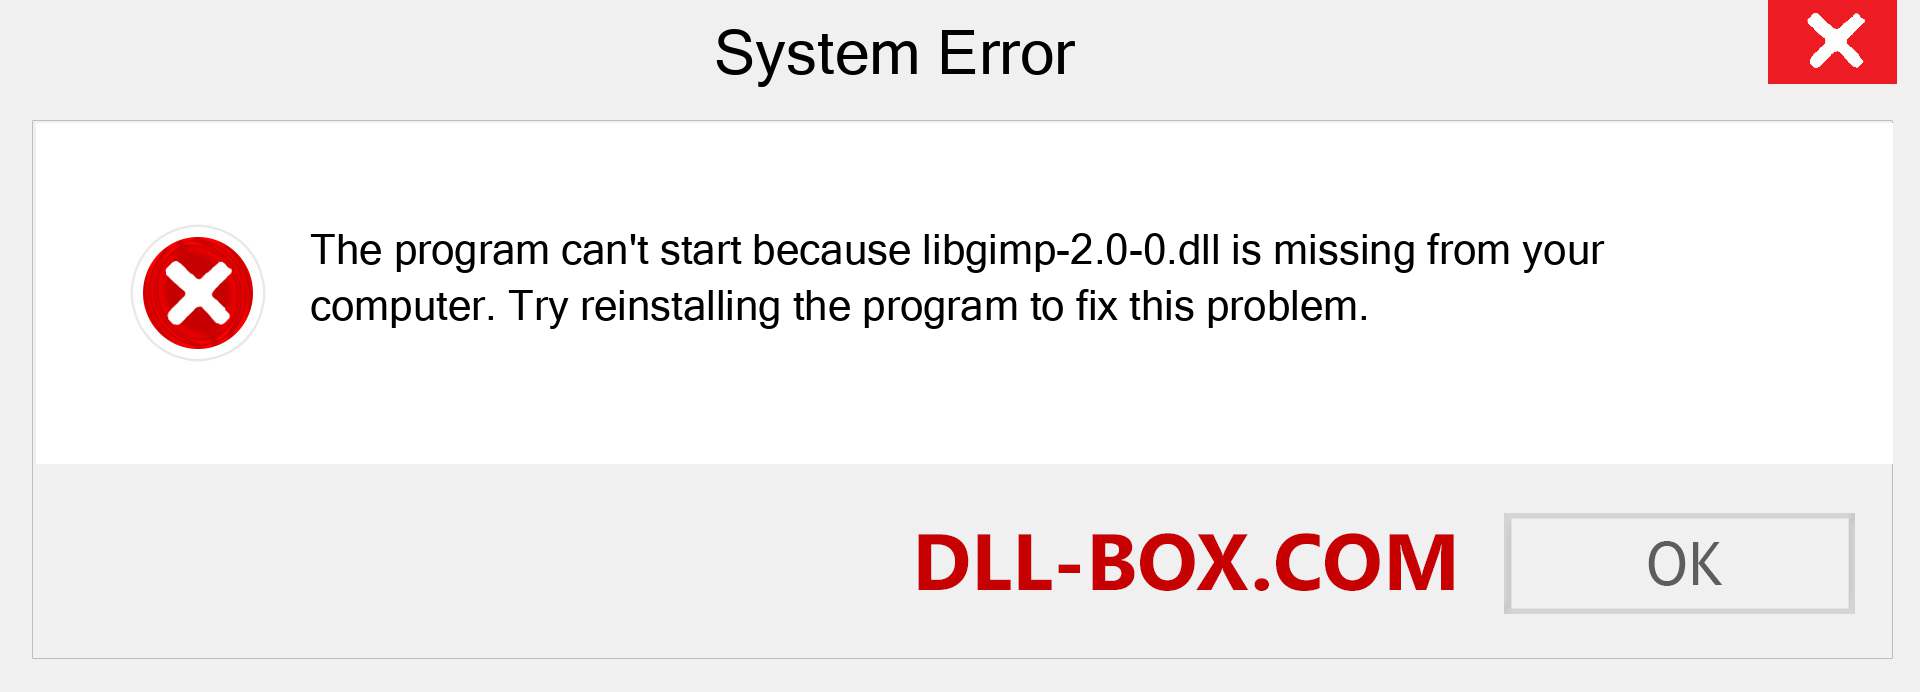  libgimp-2.0-0.dll file is missing?. Download for Windows 7, 8, 10 - Fix  libgimp-2.0-0 dll Missing Error on Windows, photos, images